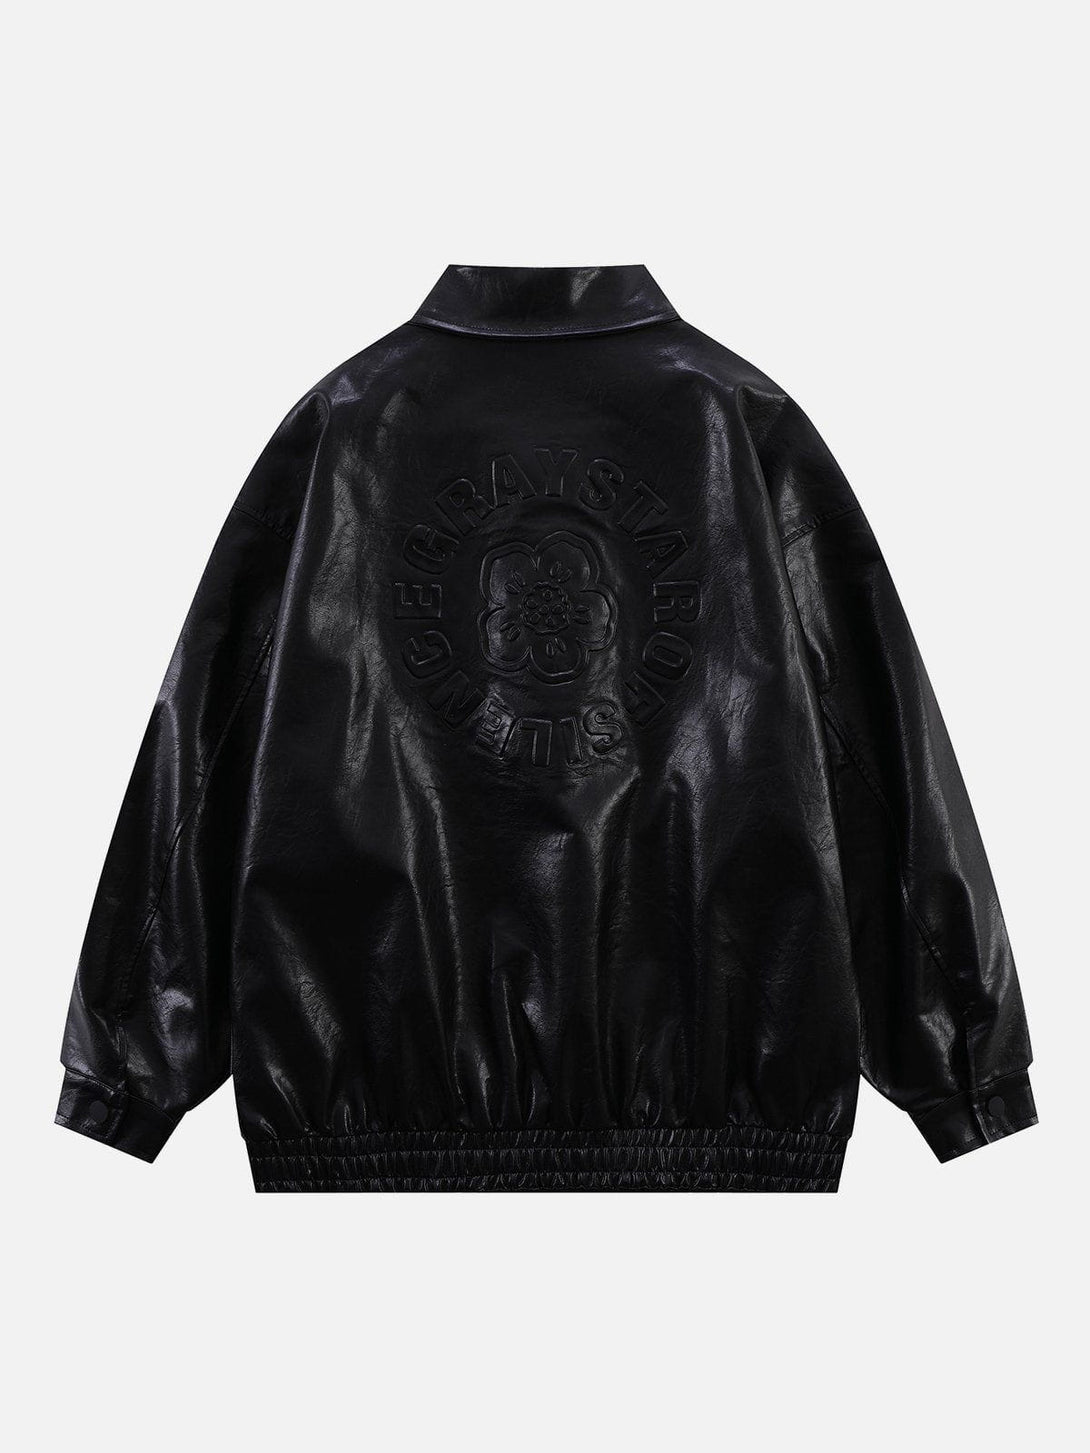 Levefly - Solid Embossed Print Leather Jacket - Streetwear Fashion - levefly.com